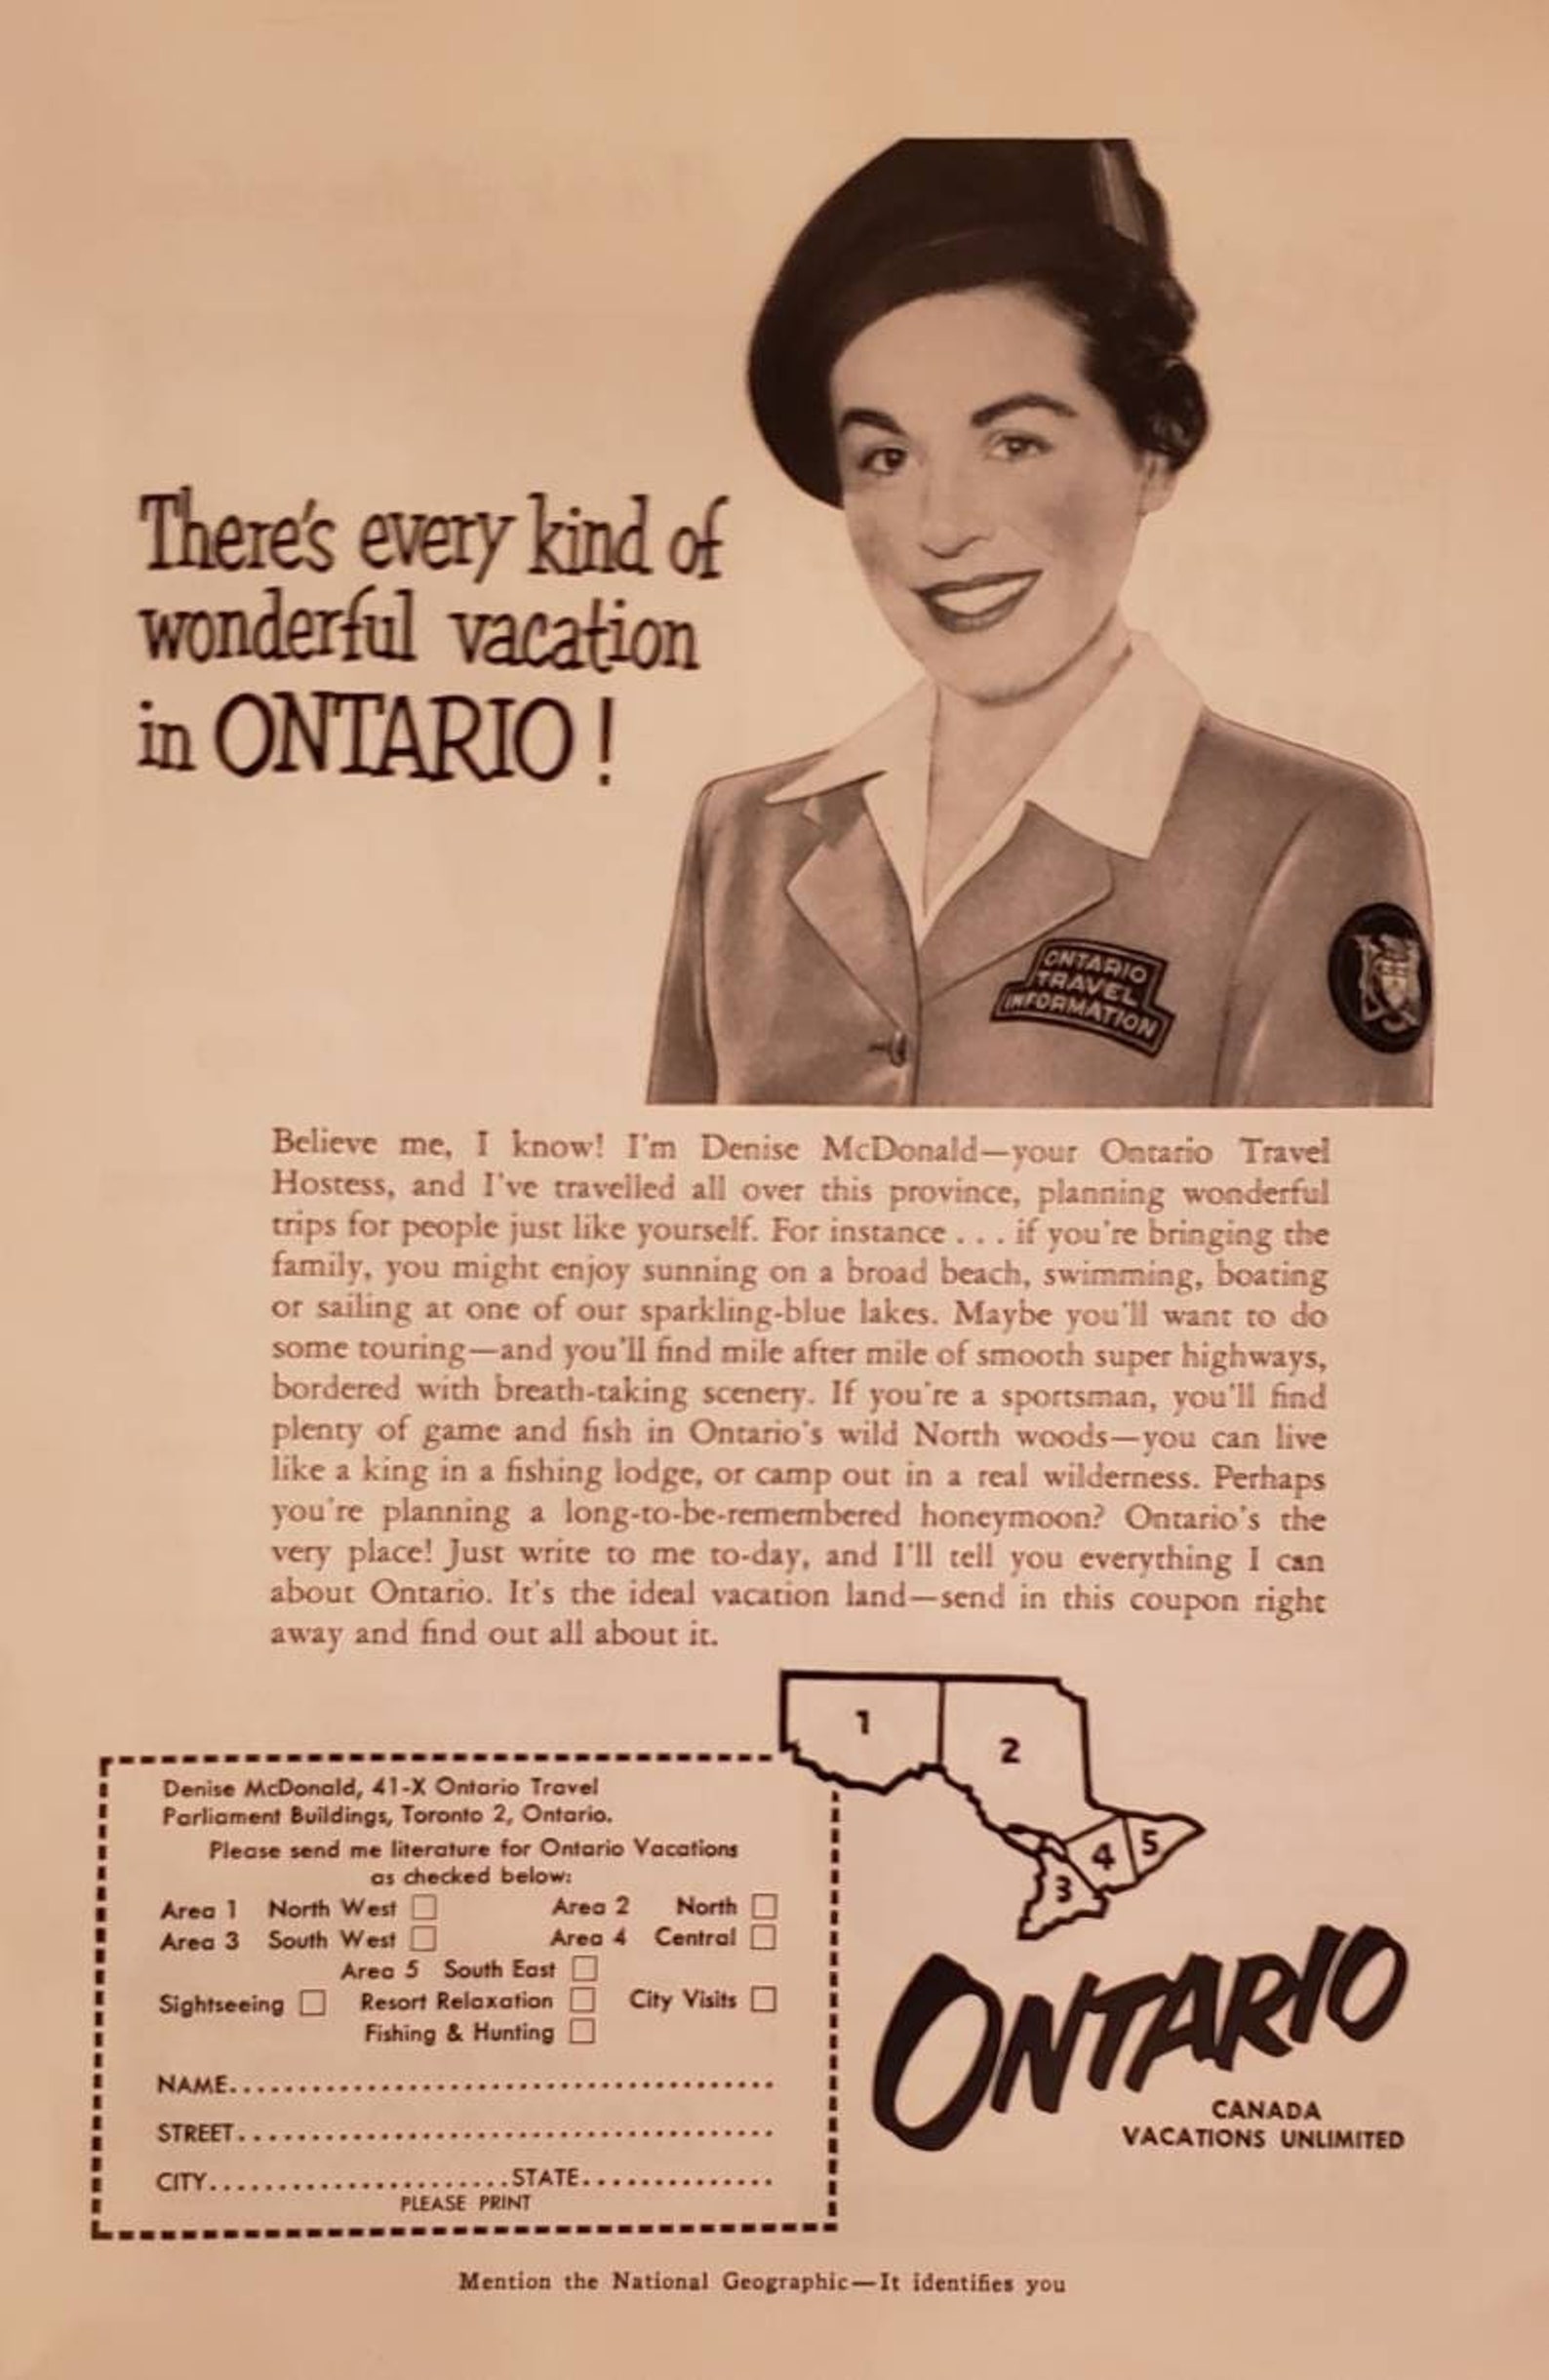 A vintage black and white magazine ad featuring a realistic illustration of a smiling woman in a shirt and blazer and a line graphic of the Ontario tourism regions. The title text reads "There's every kind of wonderful vacation in Ontario!" and continues into a paragraph written in the voice of Denise McDonald, the travel agent in the illustration, inviting you to visit beautiful Ontario and to fill out the coupon on the page to mail back to Ontario Travel for a free guide.